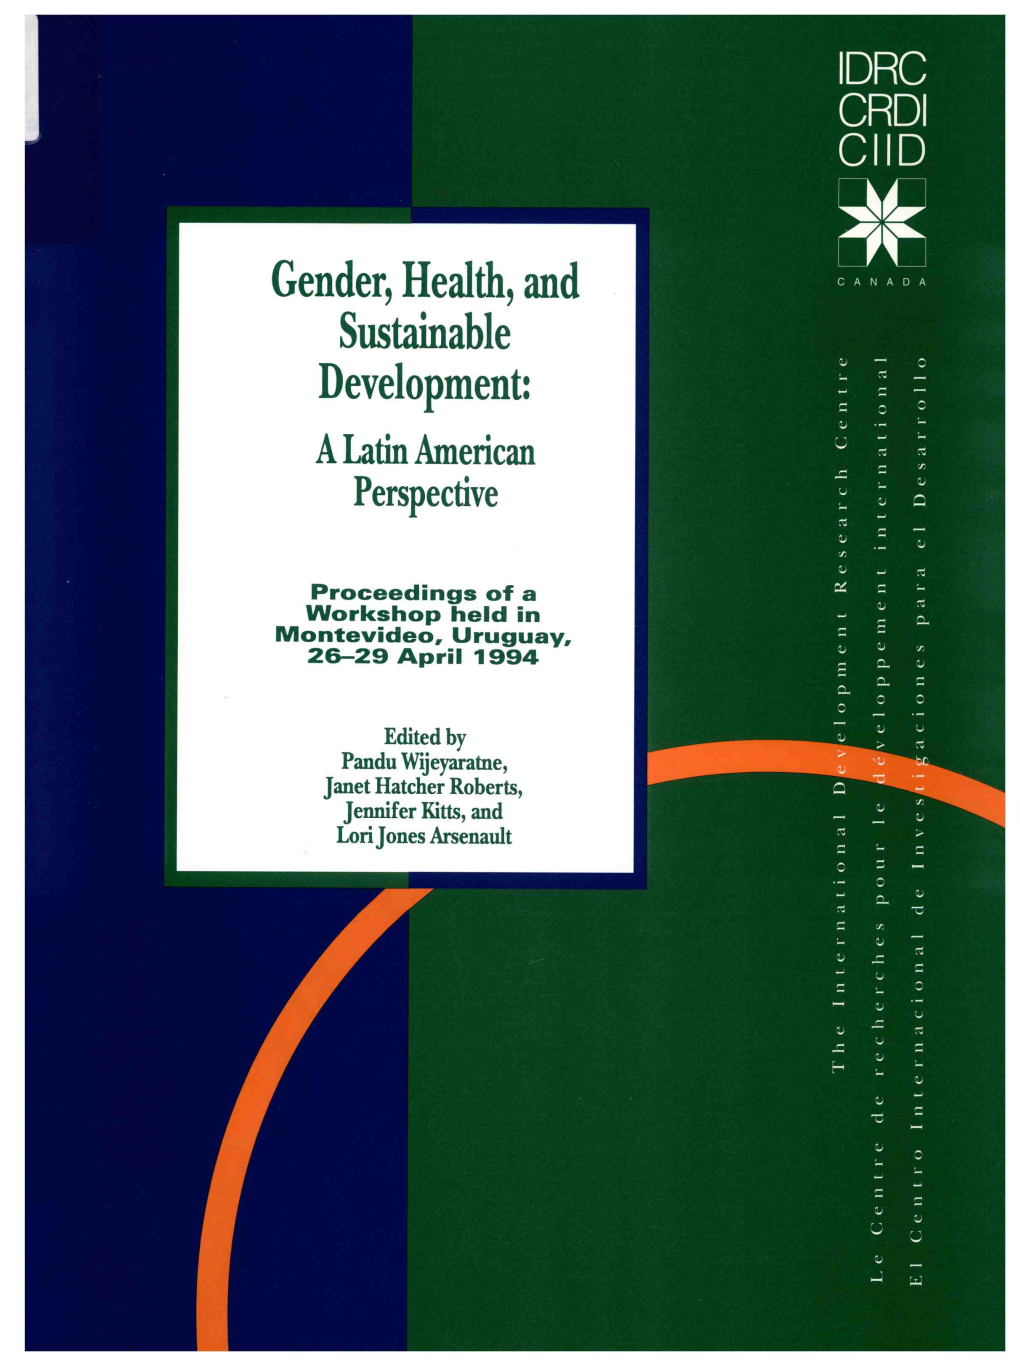 Gender, Health, and Sustainable Development: a Latin American